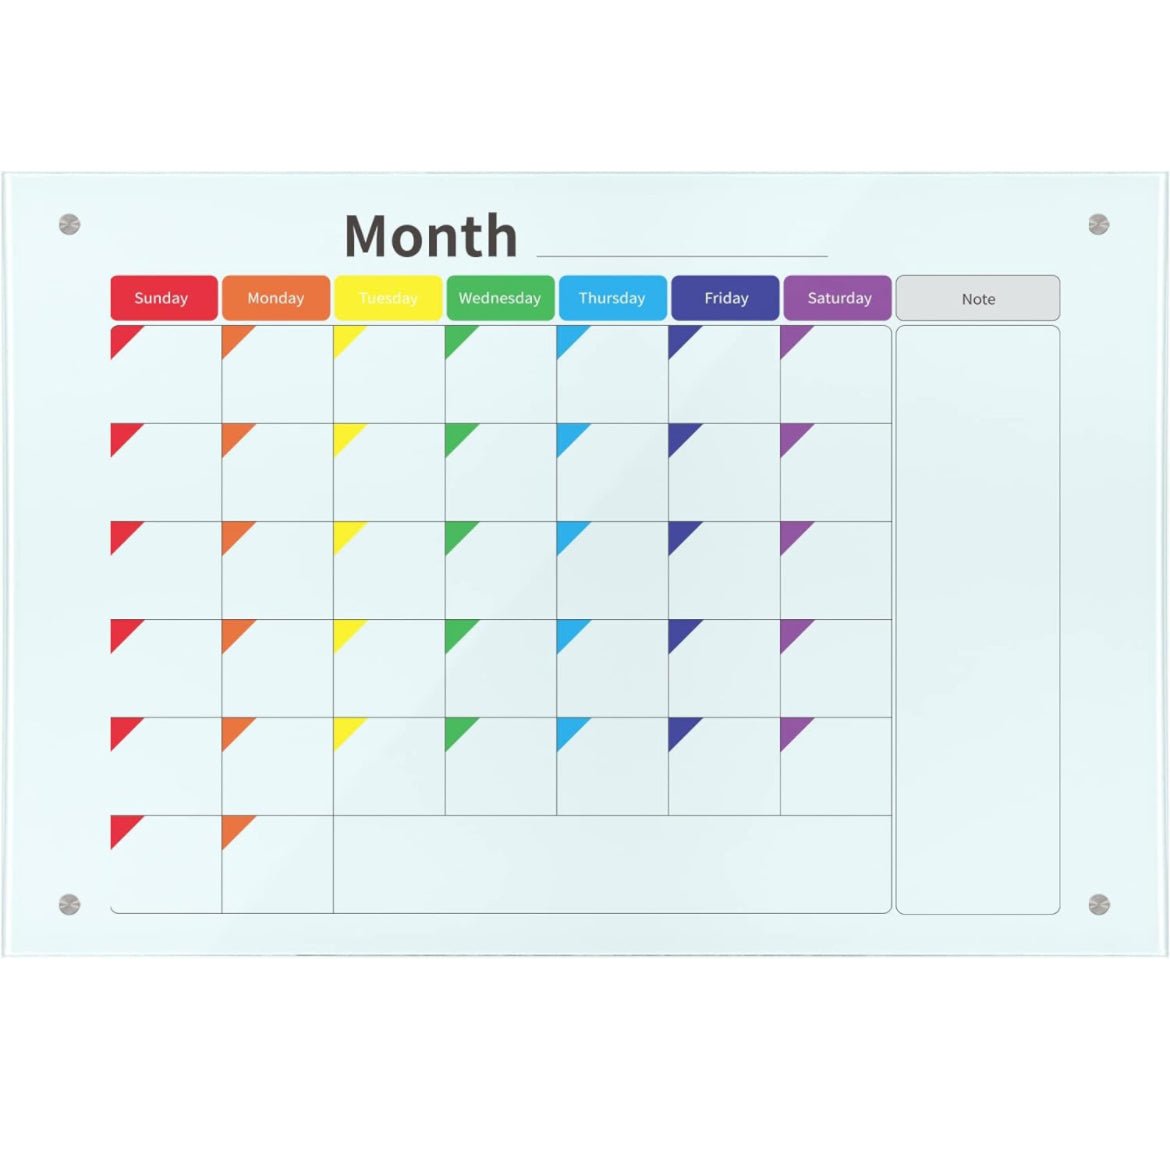 Calendar, Dry Erase Board Planner, for Home, Office, or schools! Easy to clean and use - 2Much Liquidators